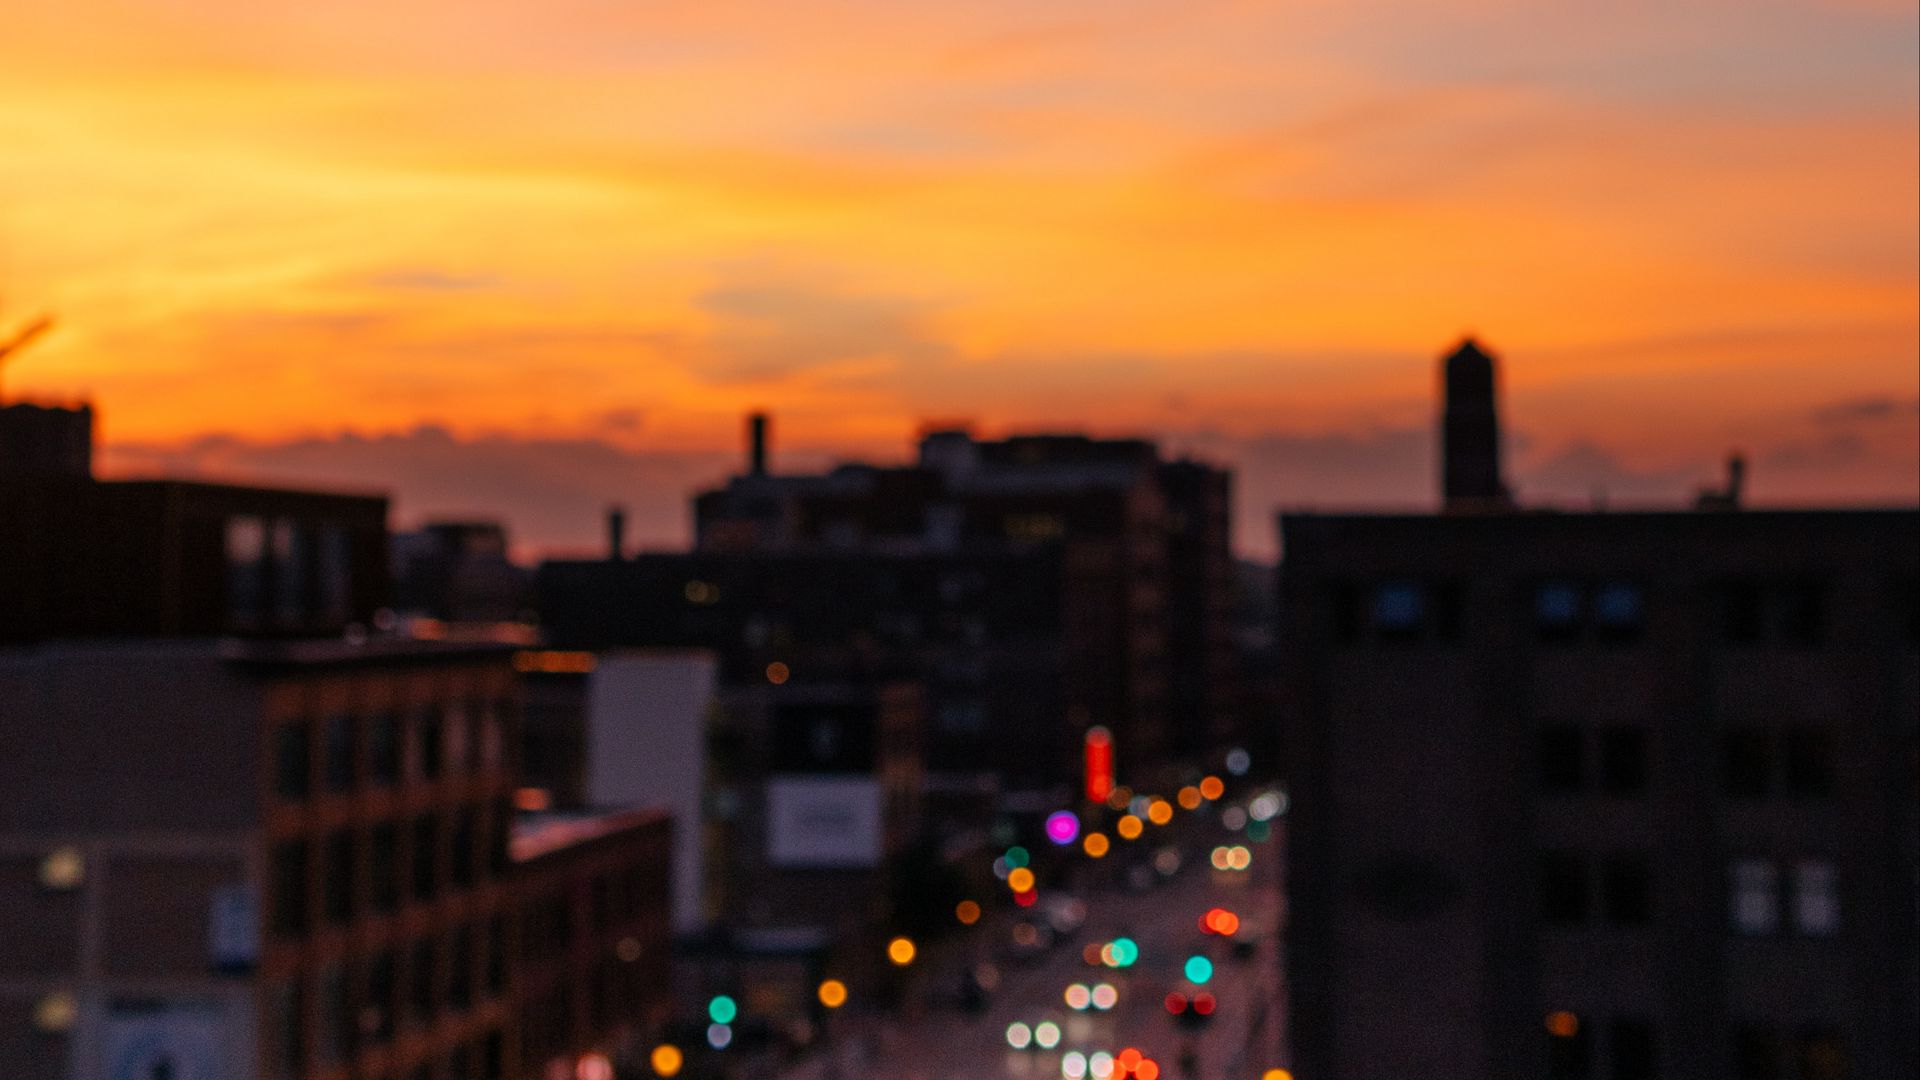 Download wallpaper 1920x1080 blur, city, glare, sunset, buildings full hd,  hdtv, fhd, 1080p hd background